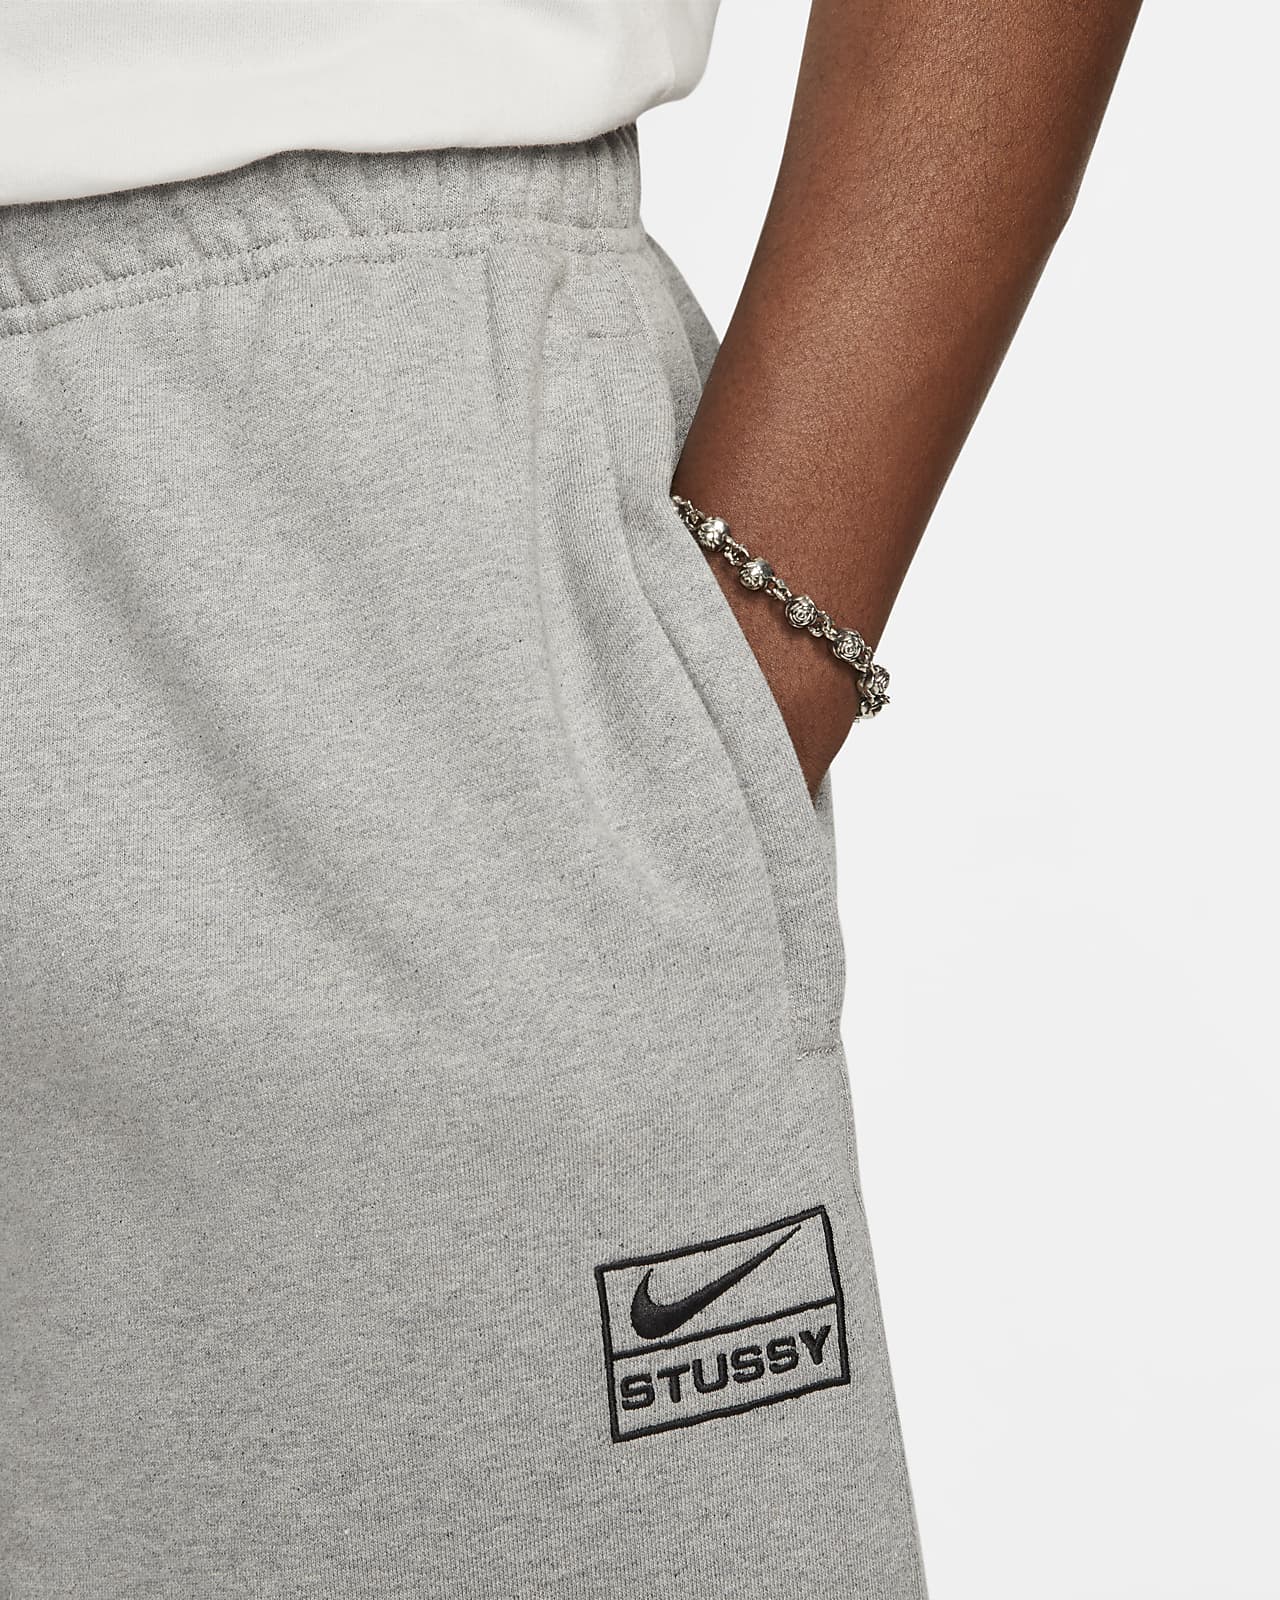 Stussy Women's Clothing And Accessories.